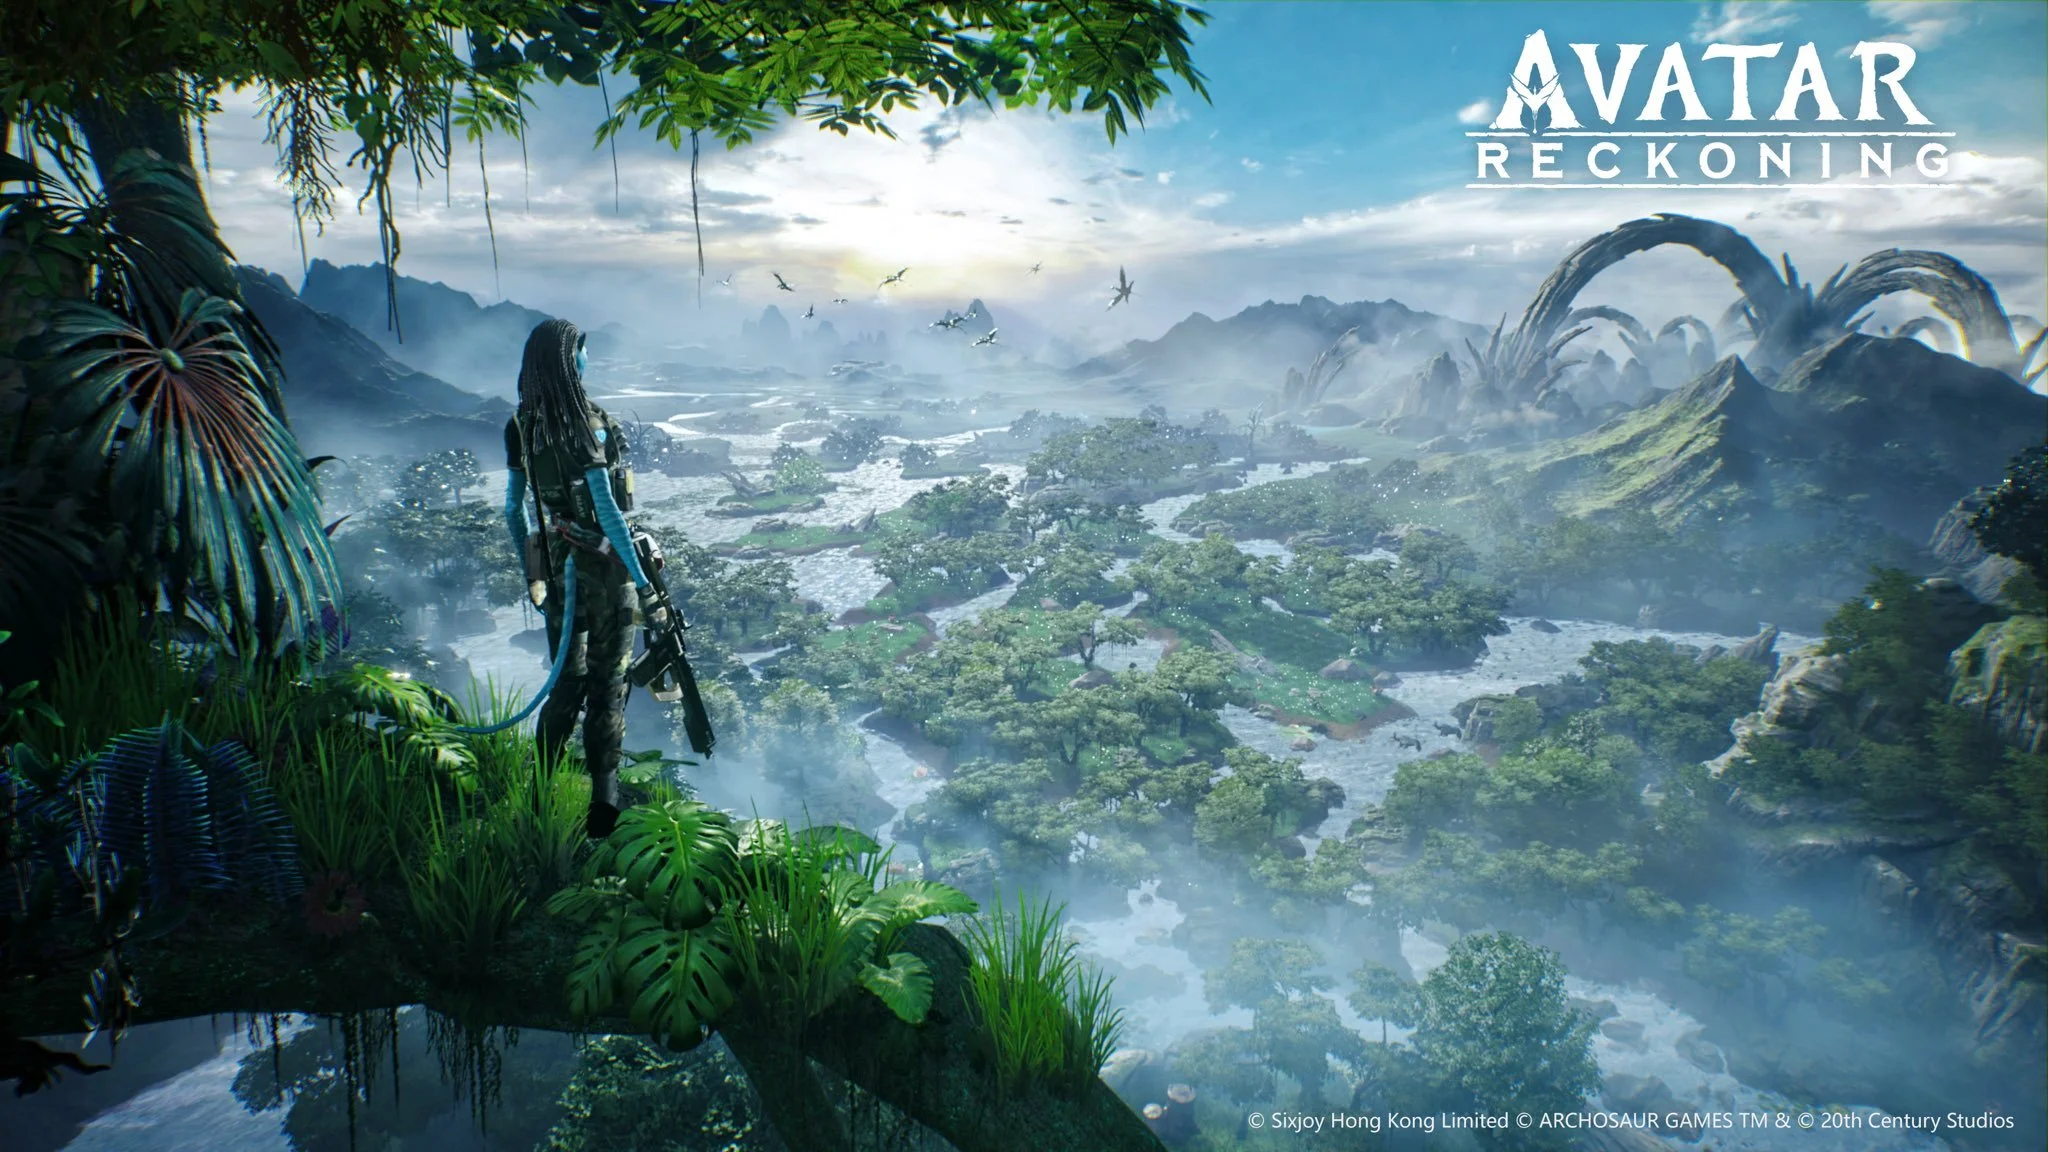 Mobile shooter based on the Avatar movie universe has been canceled